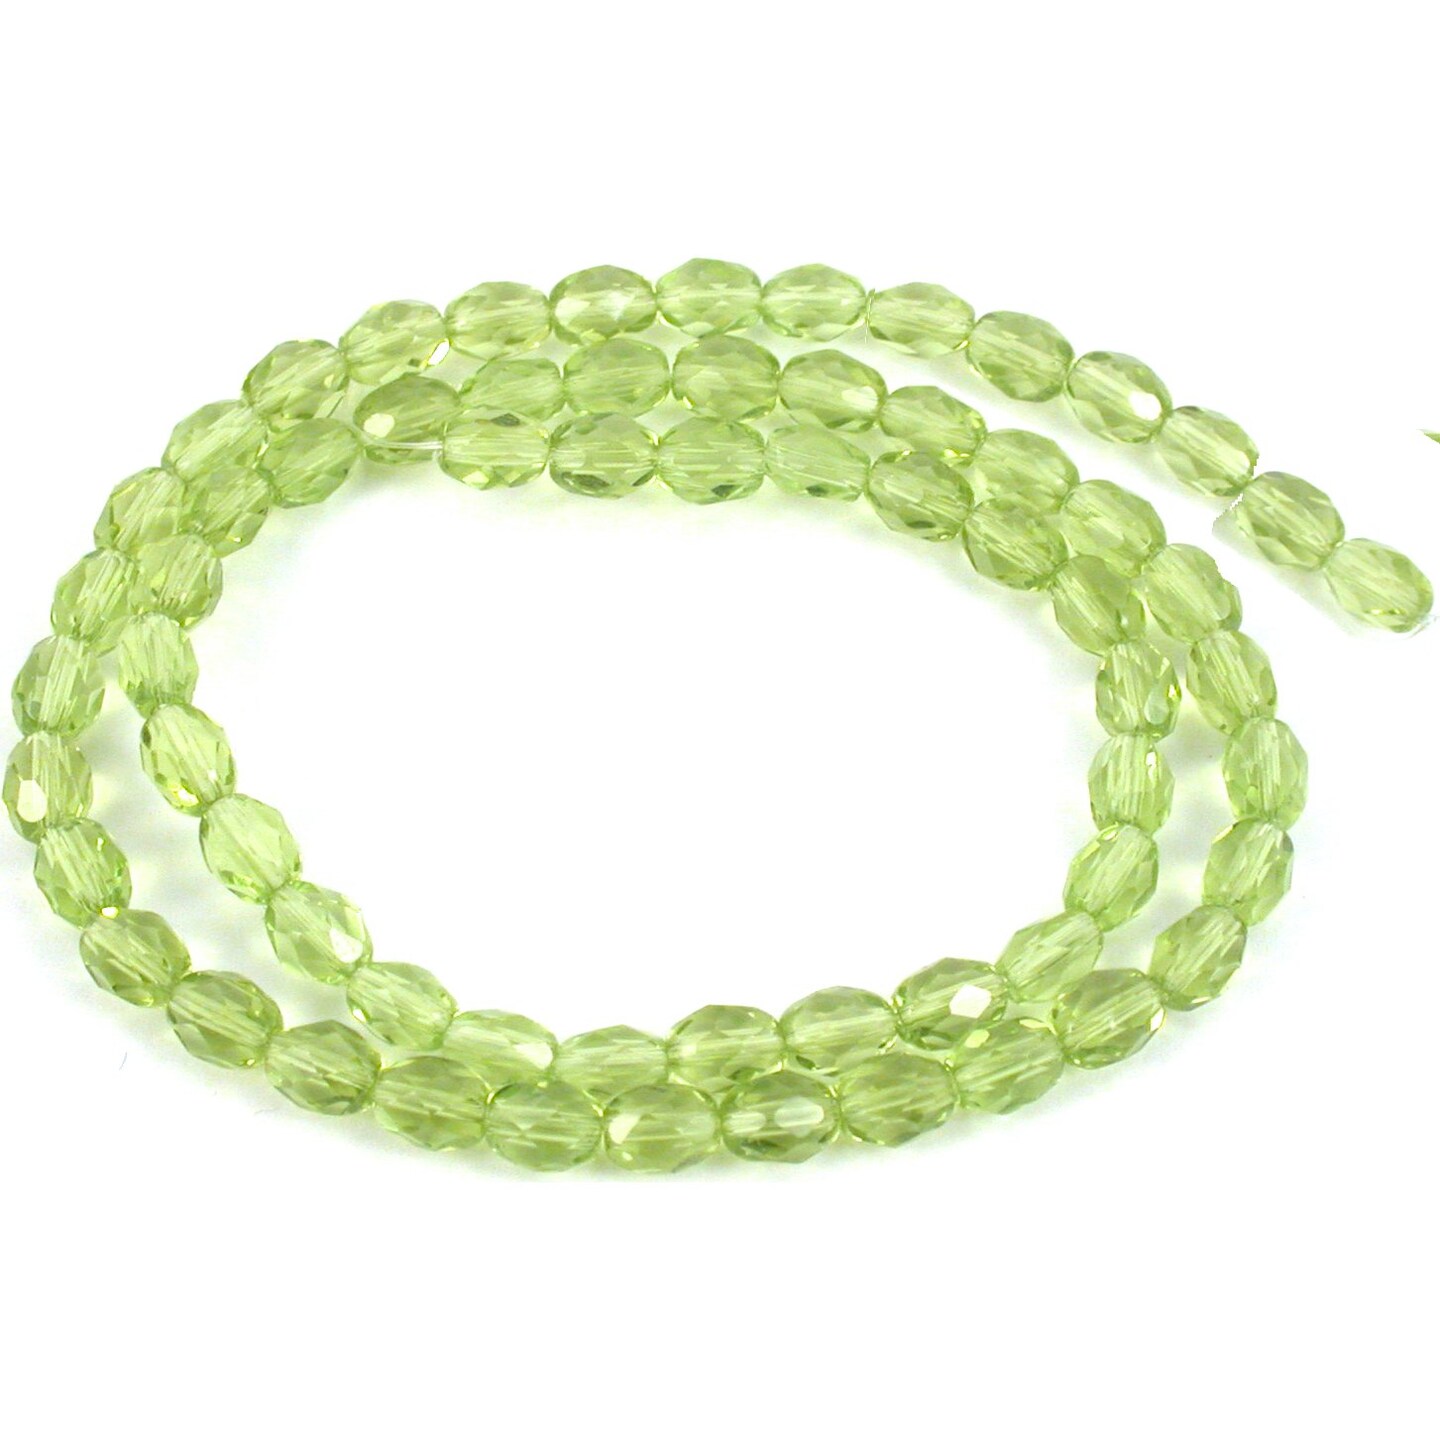 Peridot Green Rice FP Chinese Crystal Beads 5mm 1 St